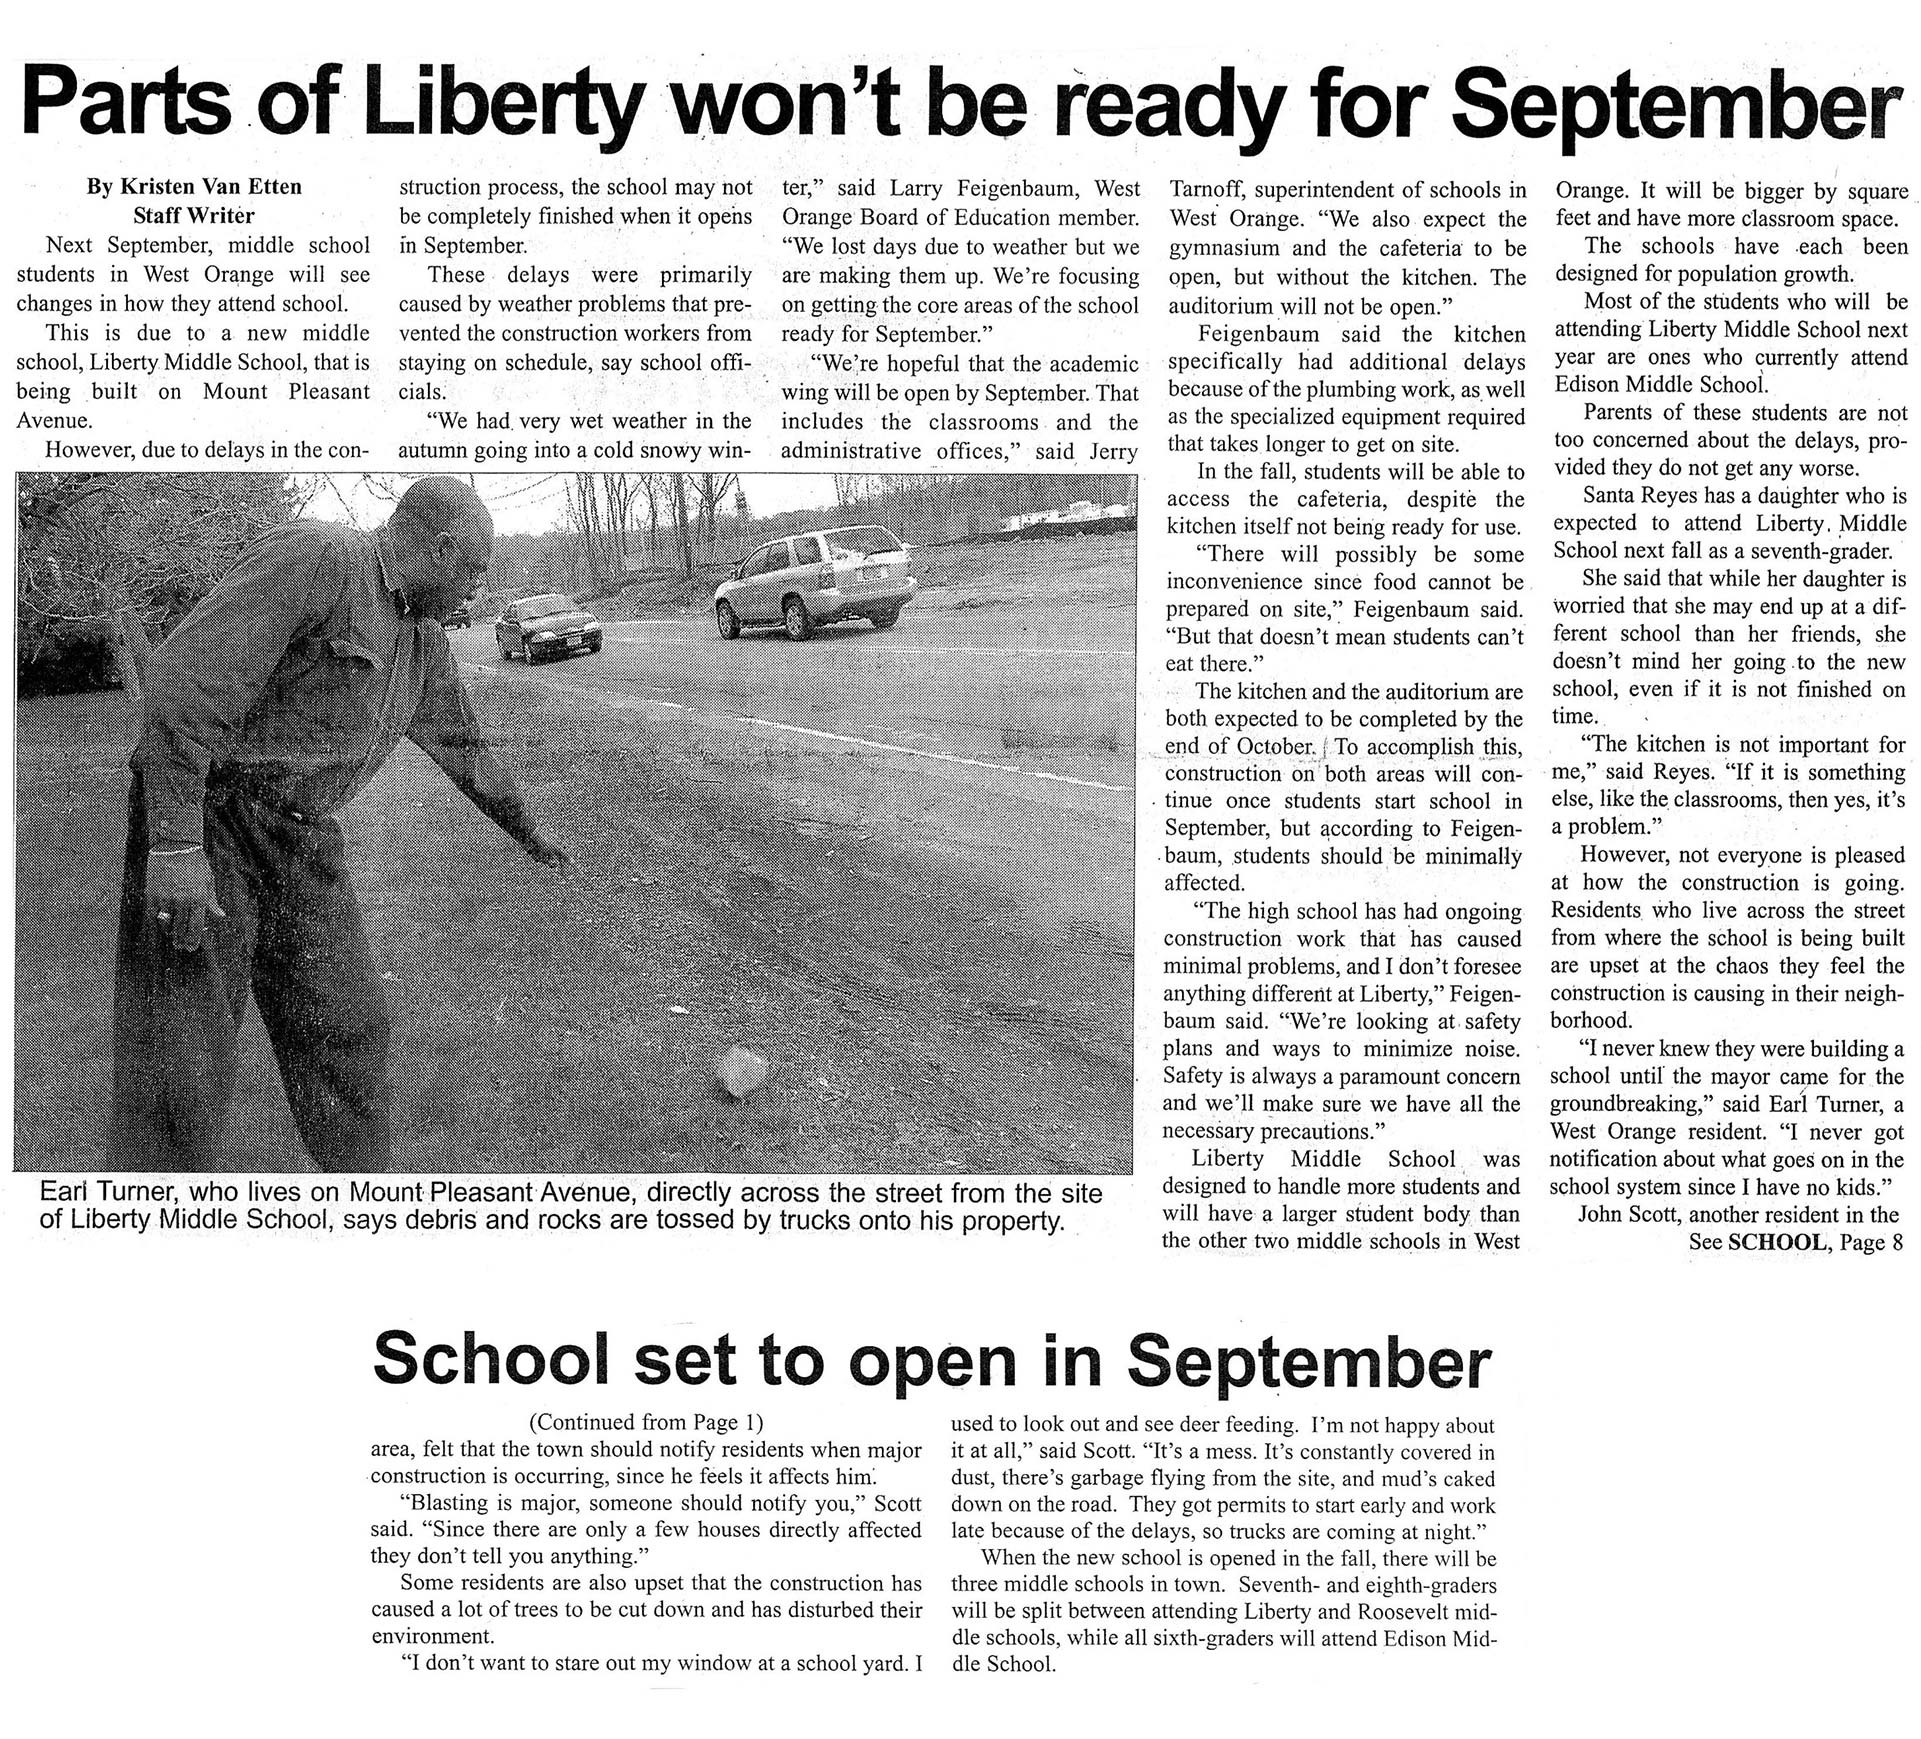 Newspaper article titled, Parts of Liberty won't be ready for September.